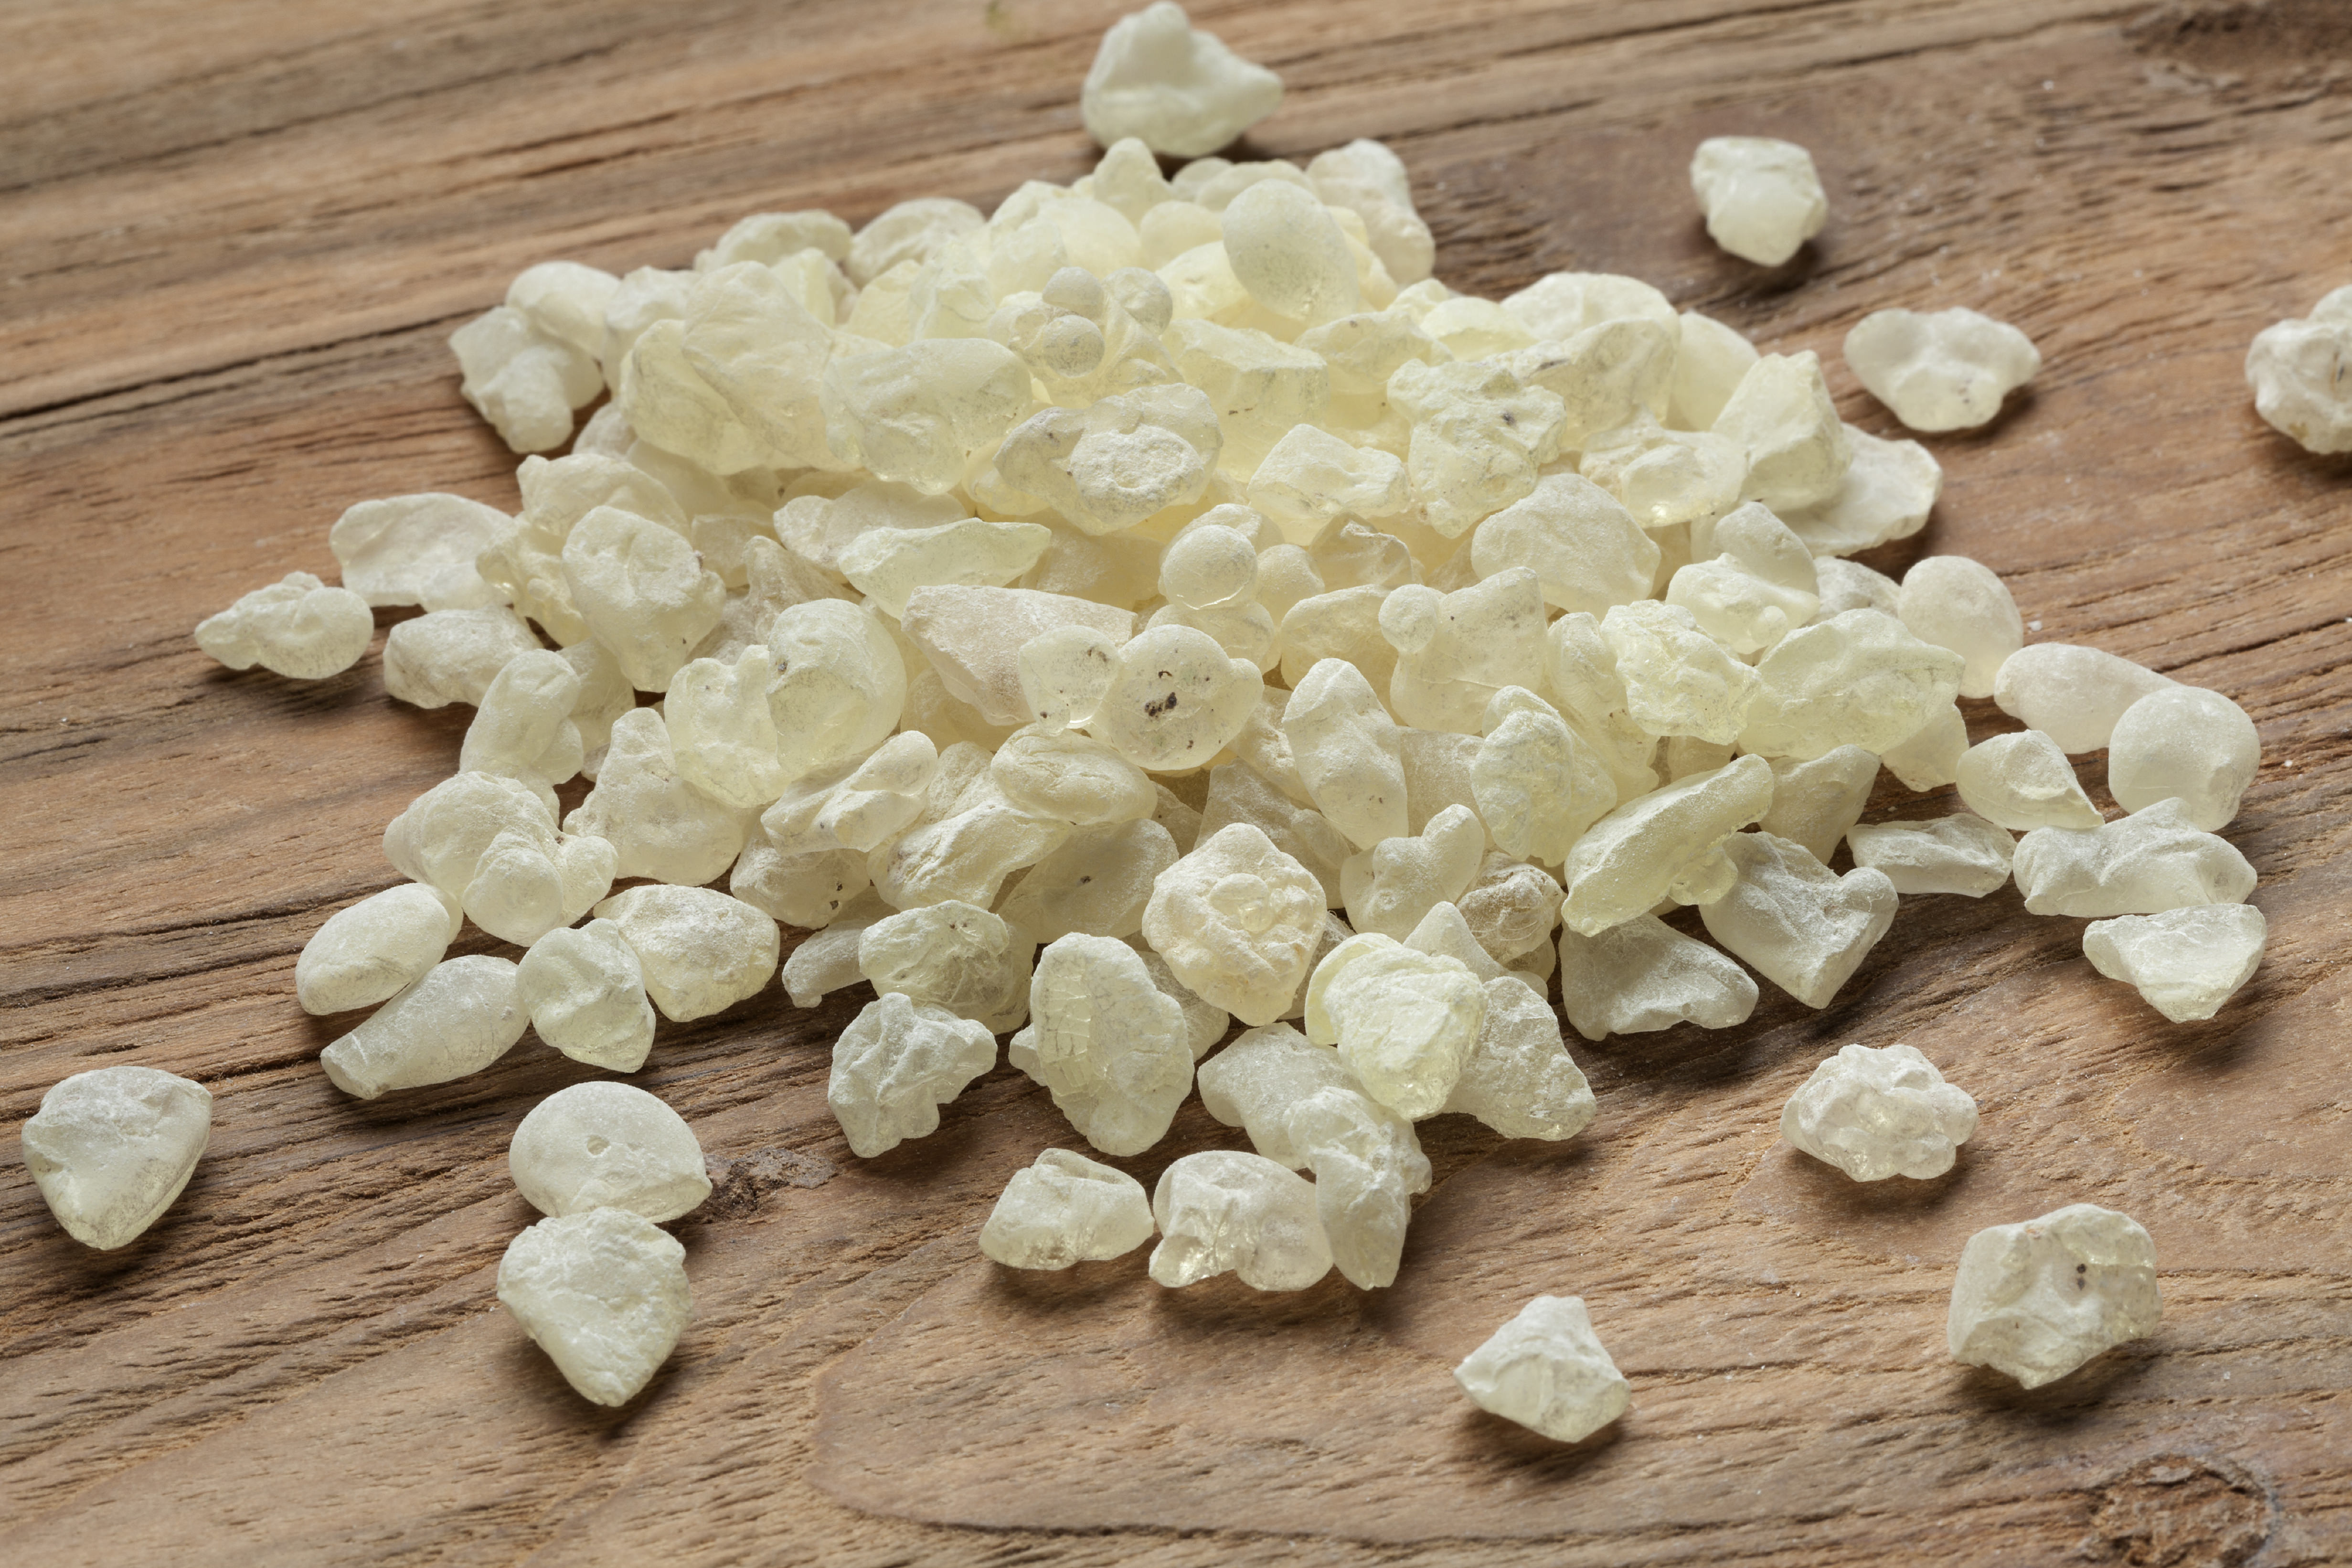 How Mastic is Used in Greek Cooking